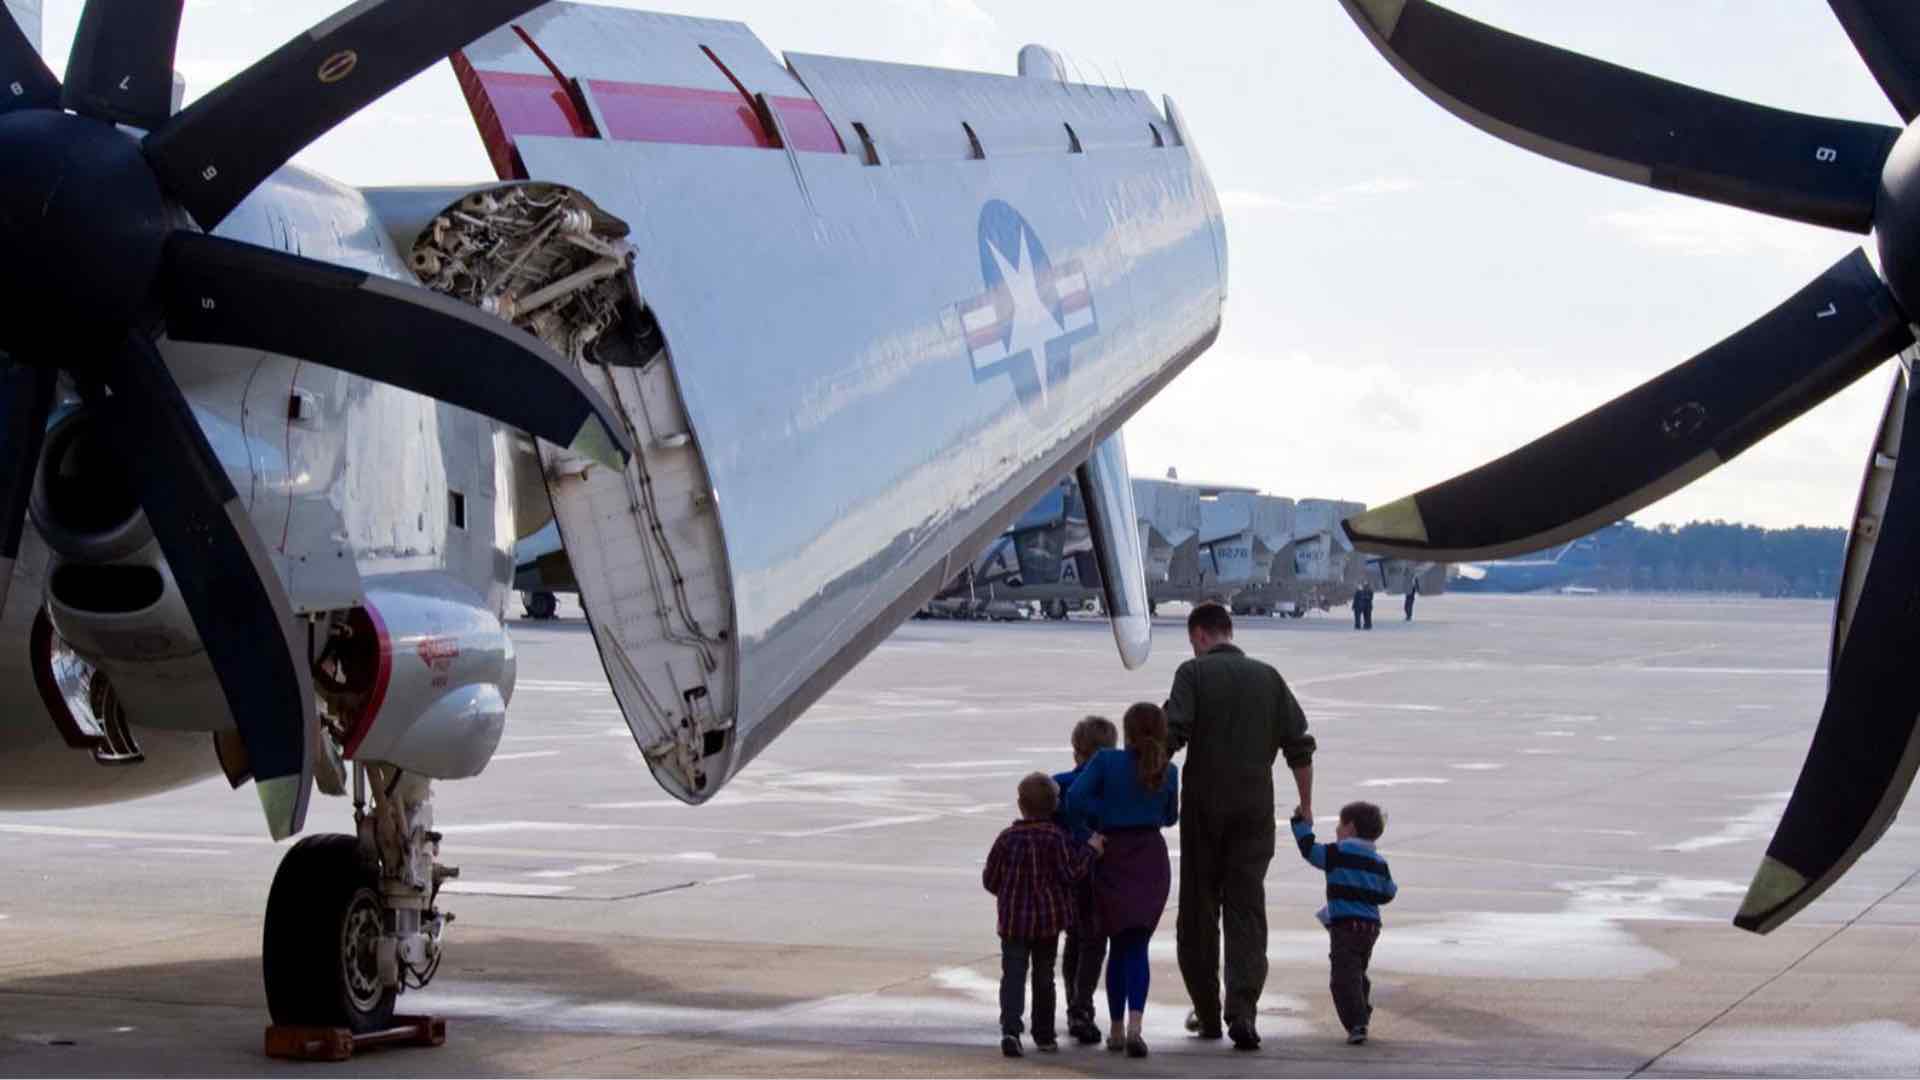 Navy Family with Kids Viewing Aircraft with Vertical Takeoff